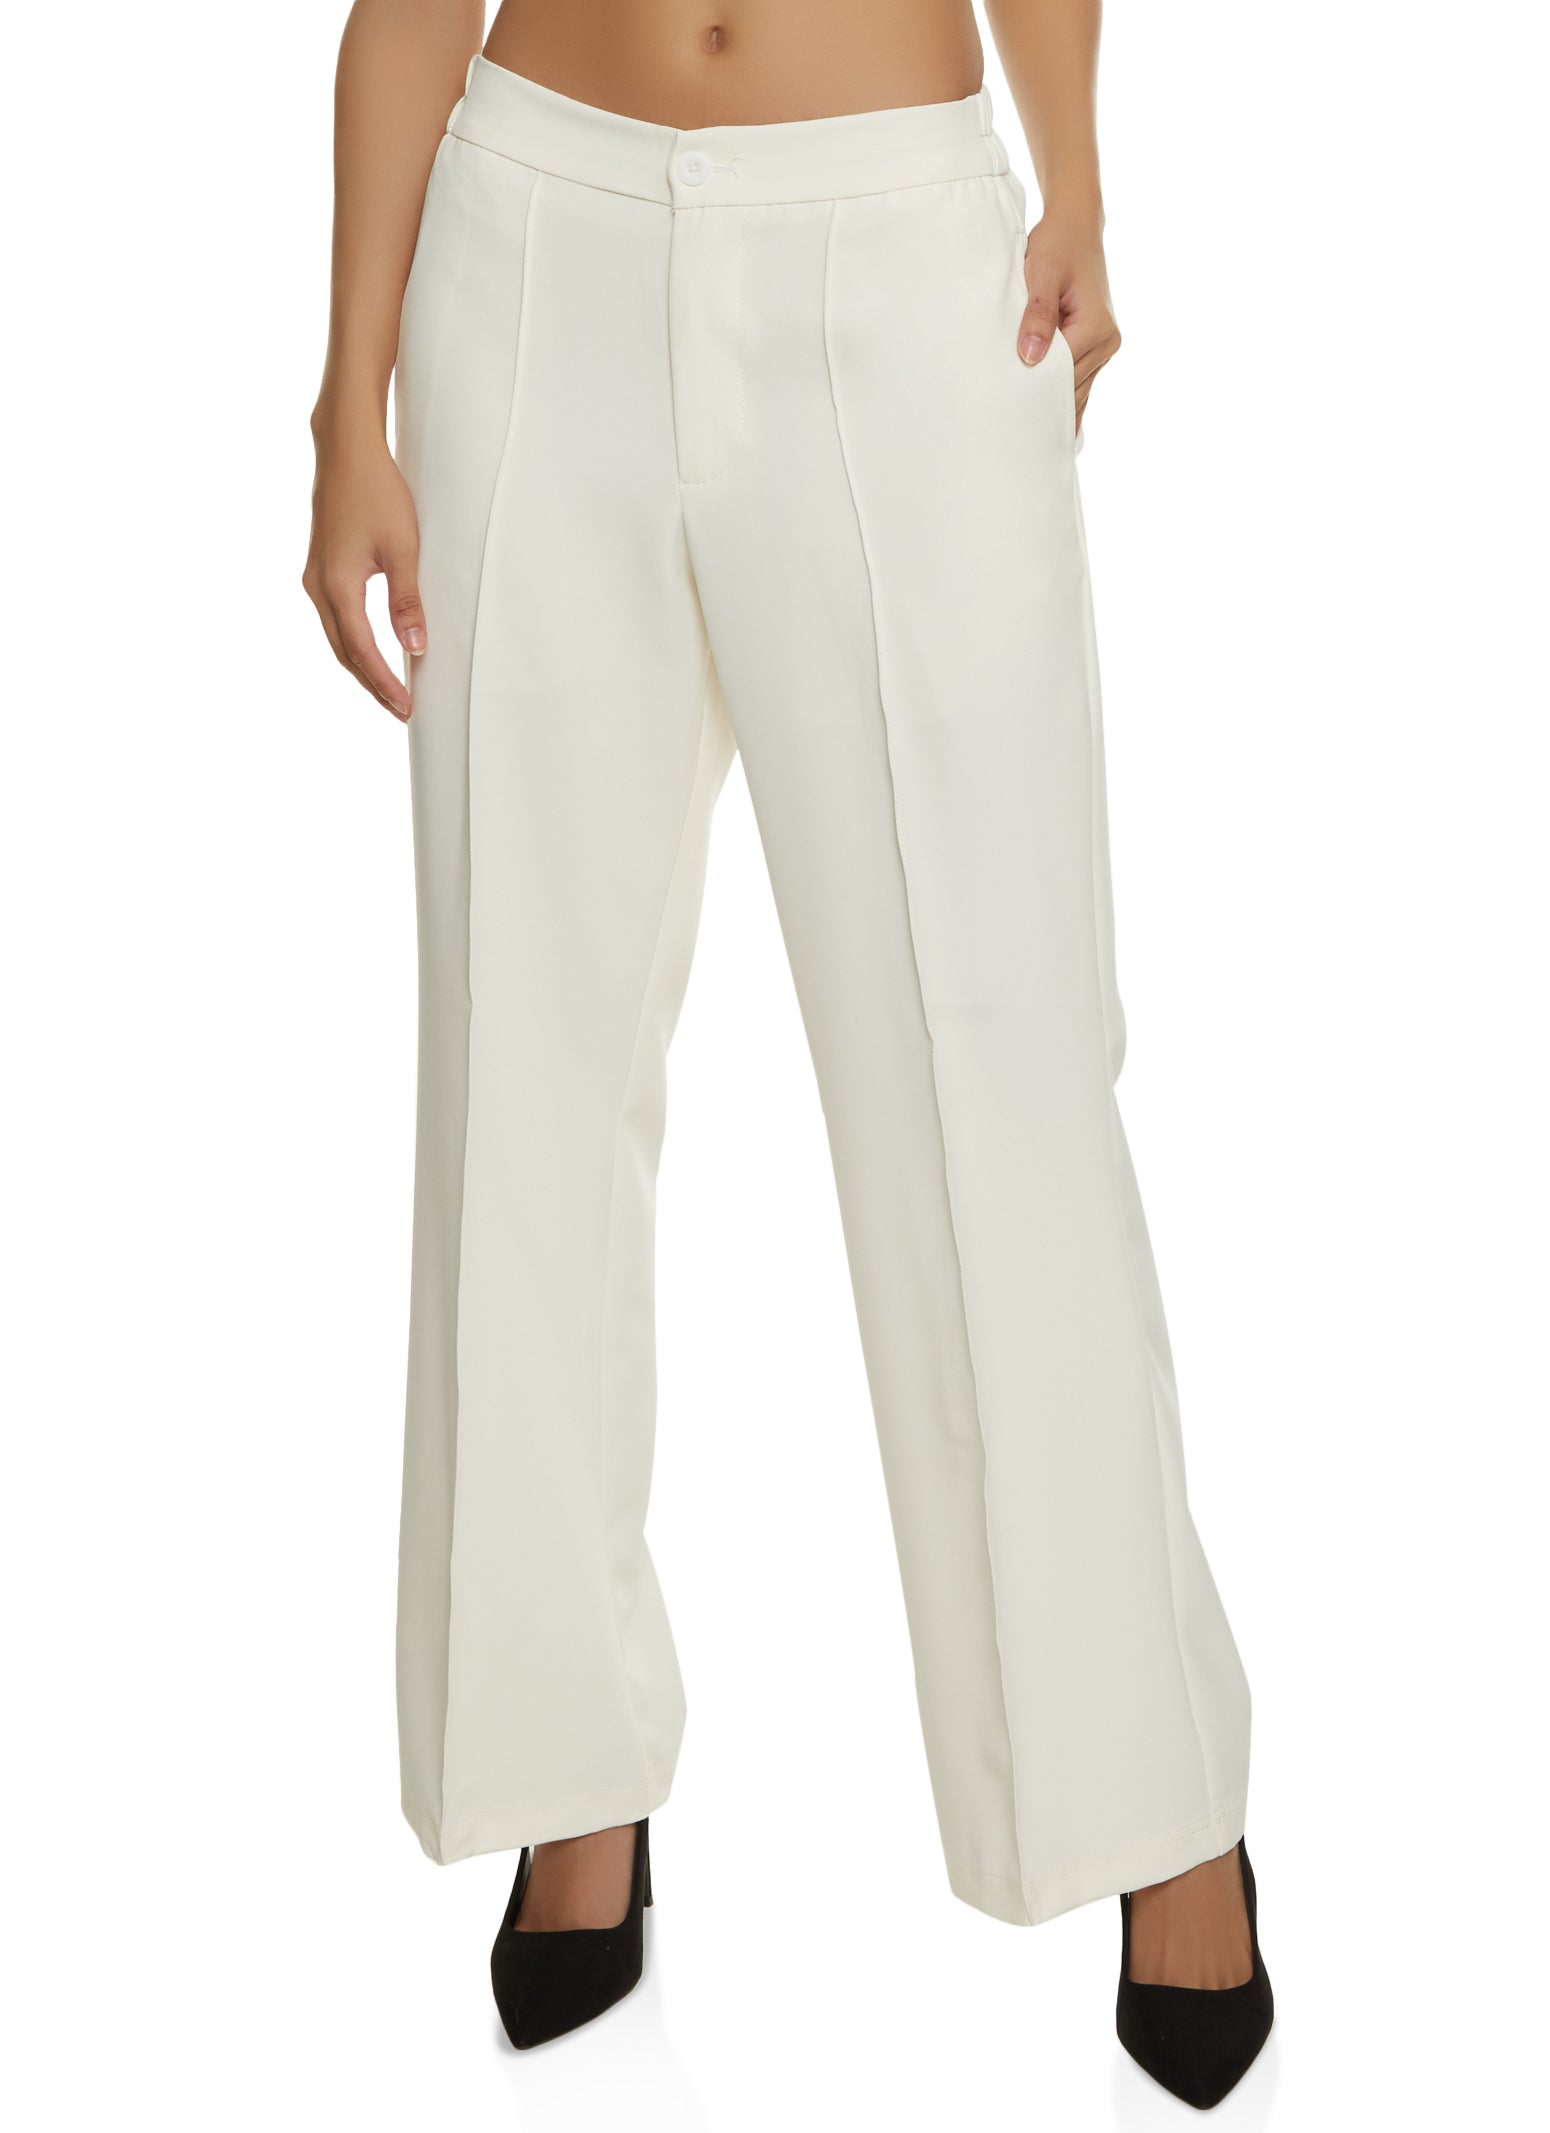 Fanciful Pleats Wide-Leg Pants in Ivory - Retro, Indie and Unique Fashion